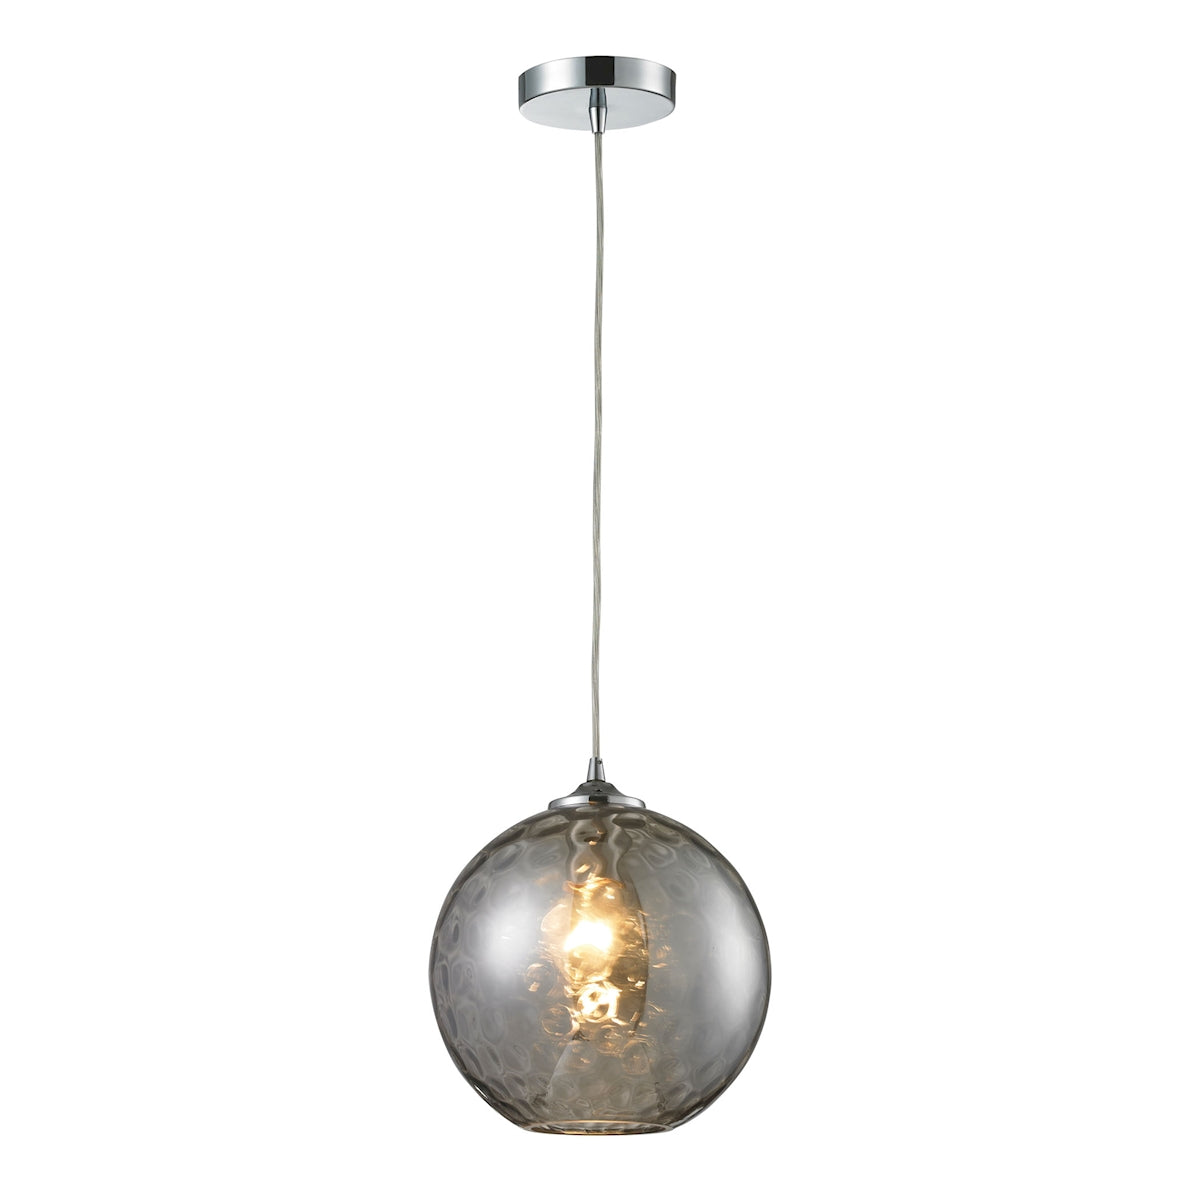 ELK Lighting 31380/1SMK Watersphere 1-Light Mini Pendant in Chrome with Hammered Smoke Glass